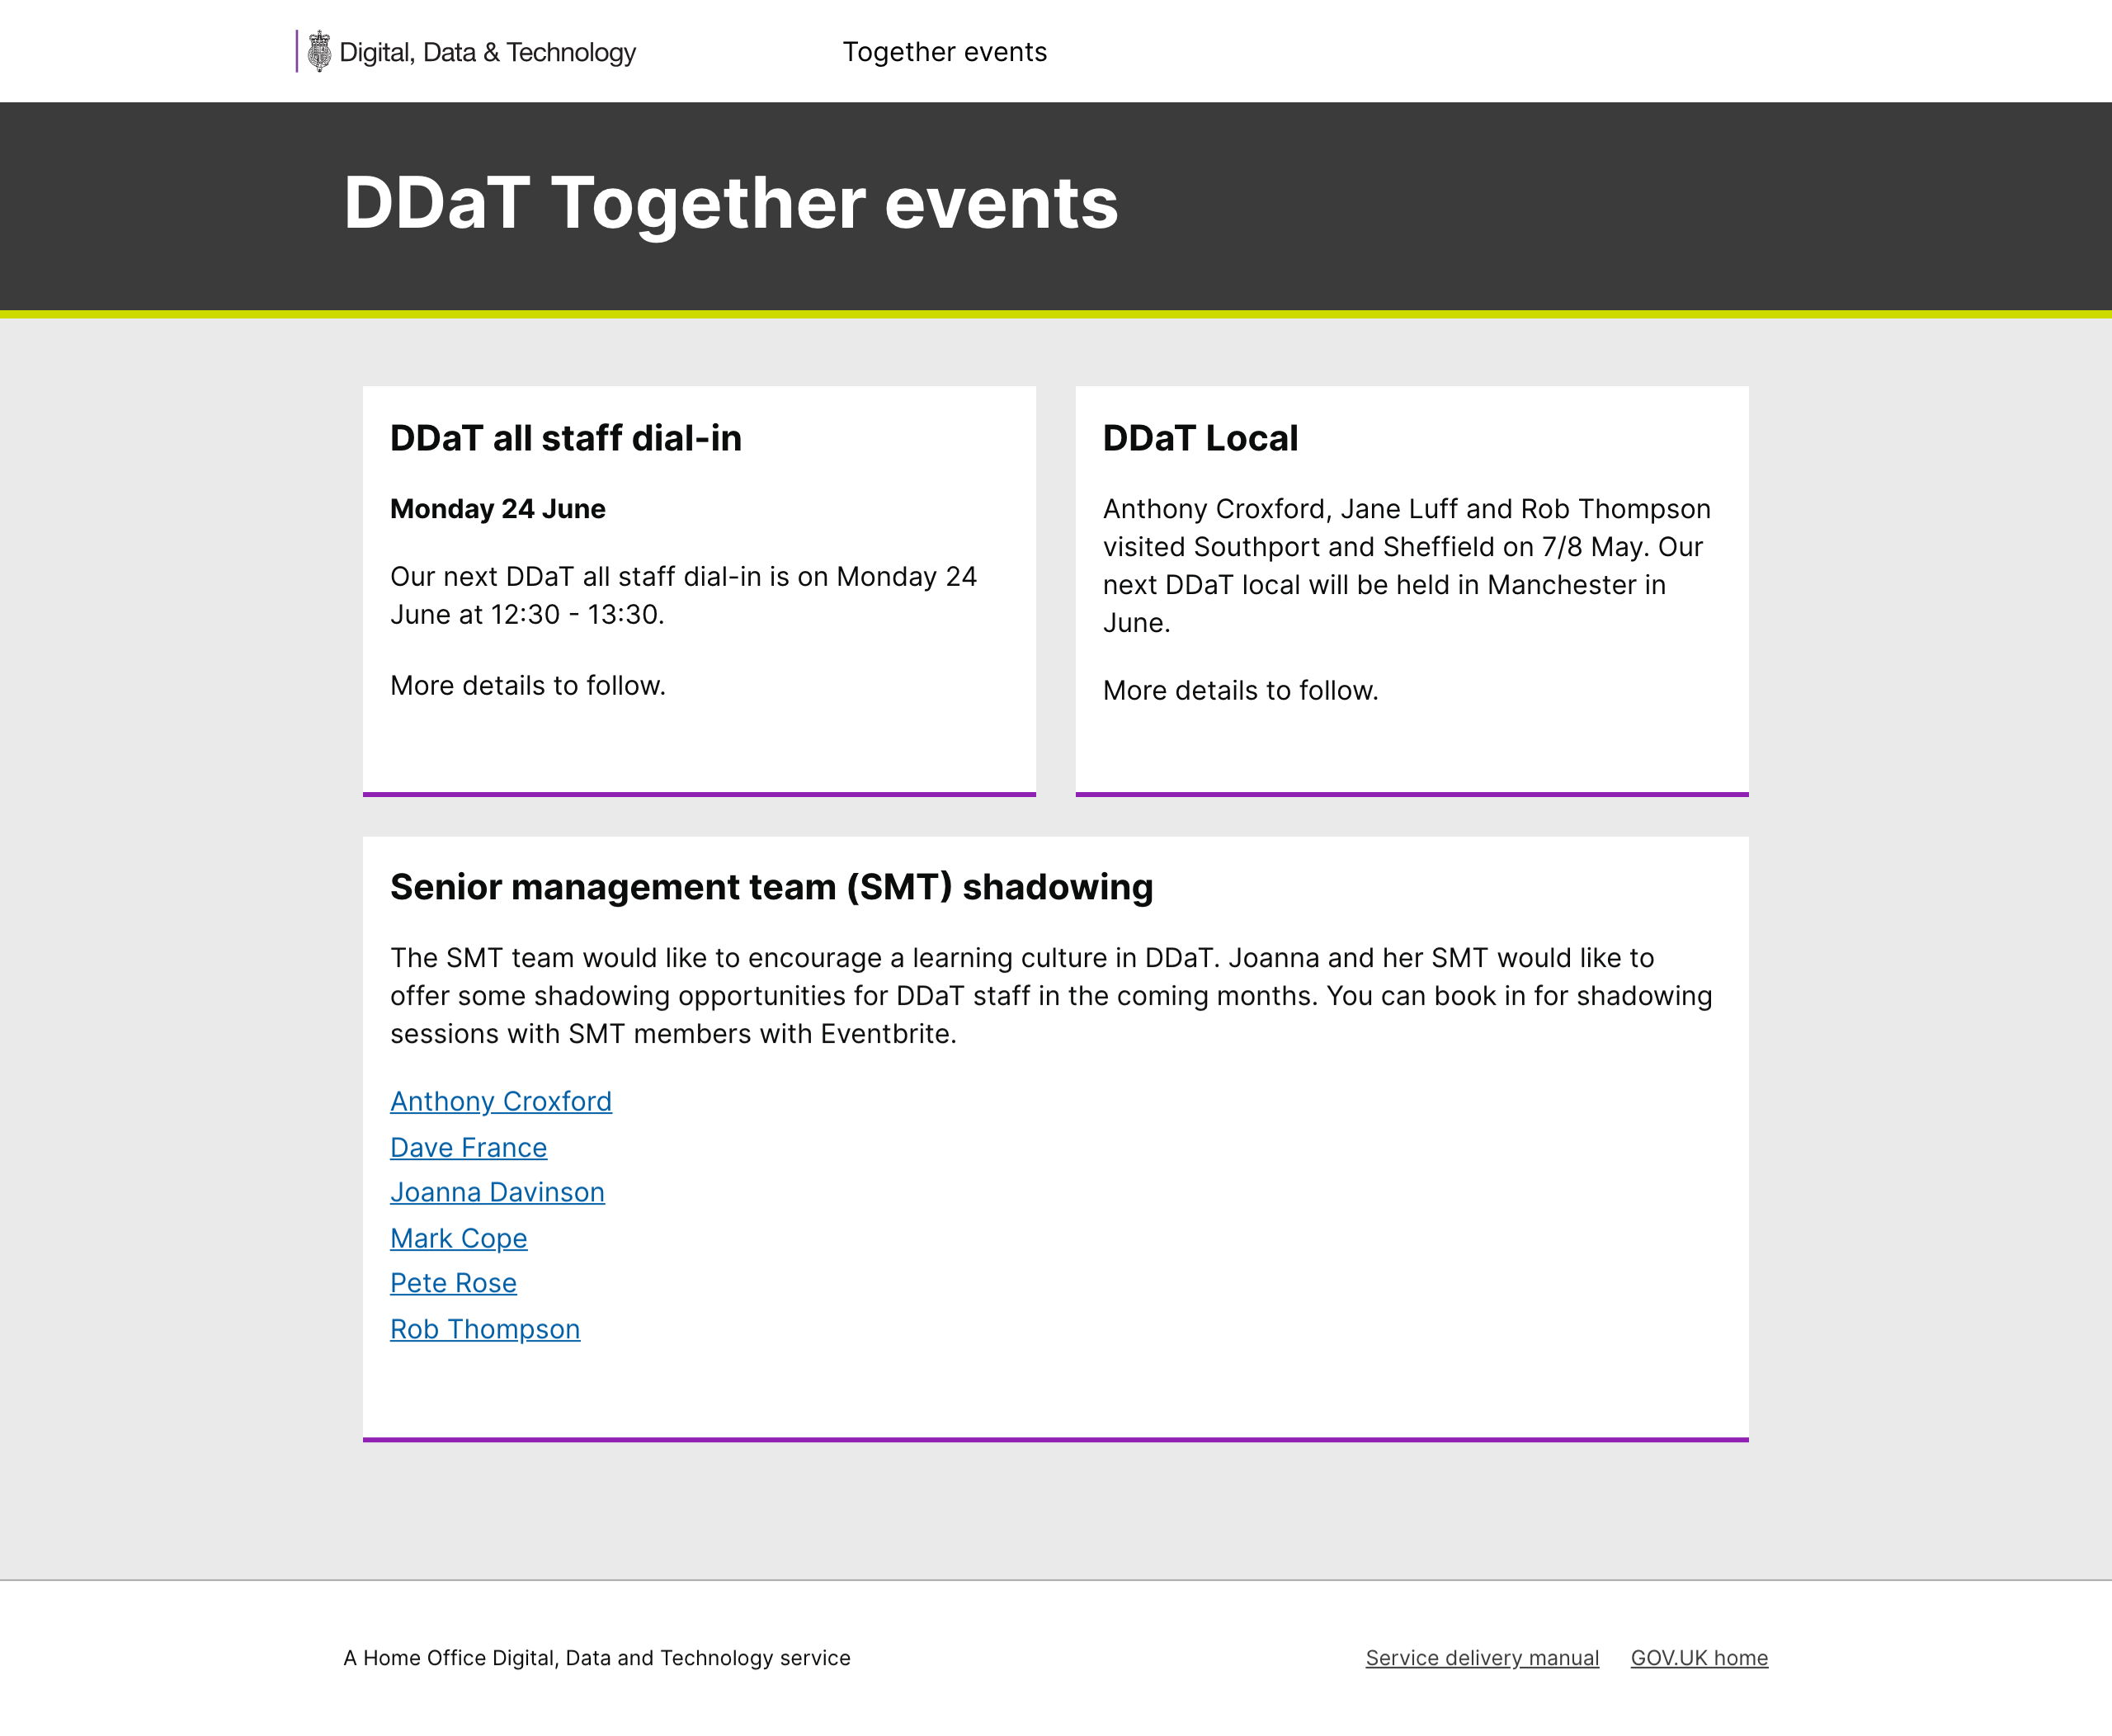 Screenshot of a Home Office 'Digital, Data and Technology Together' events page